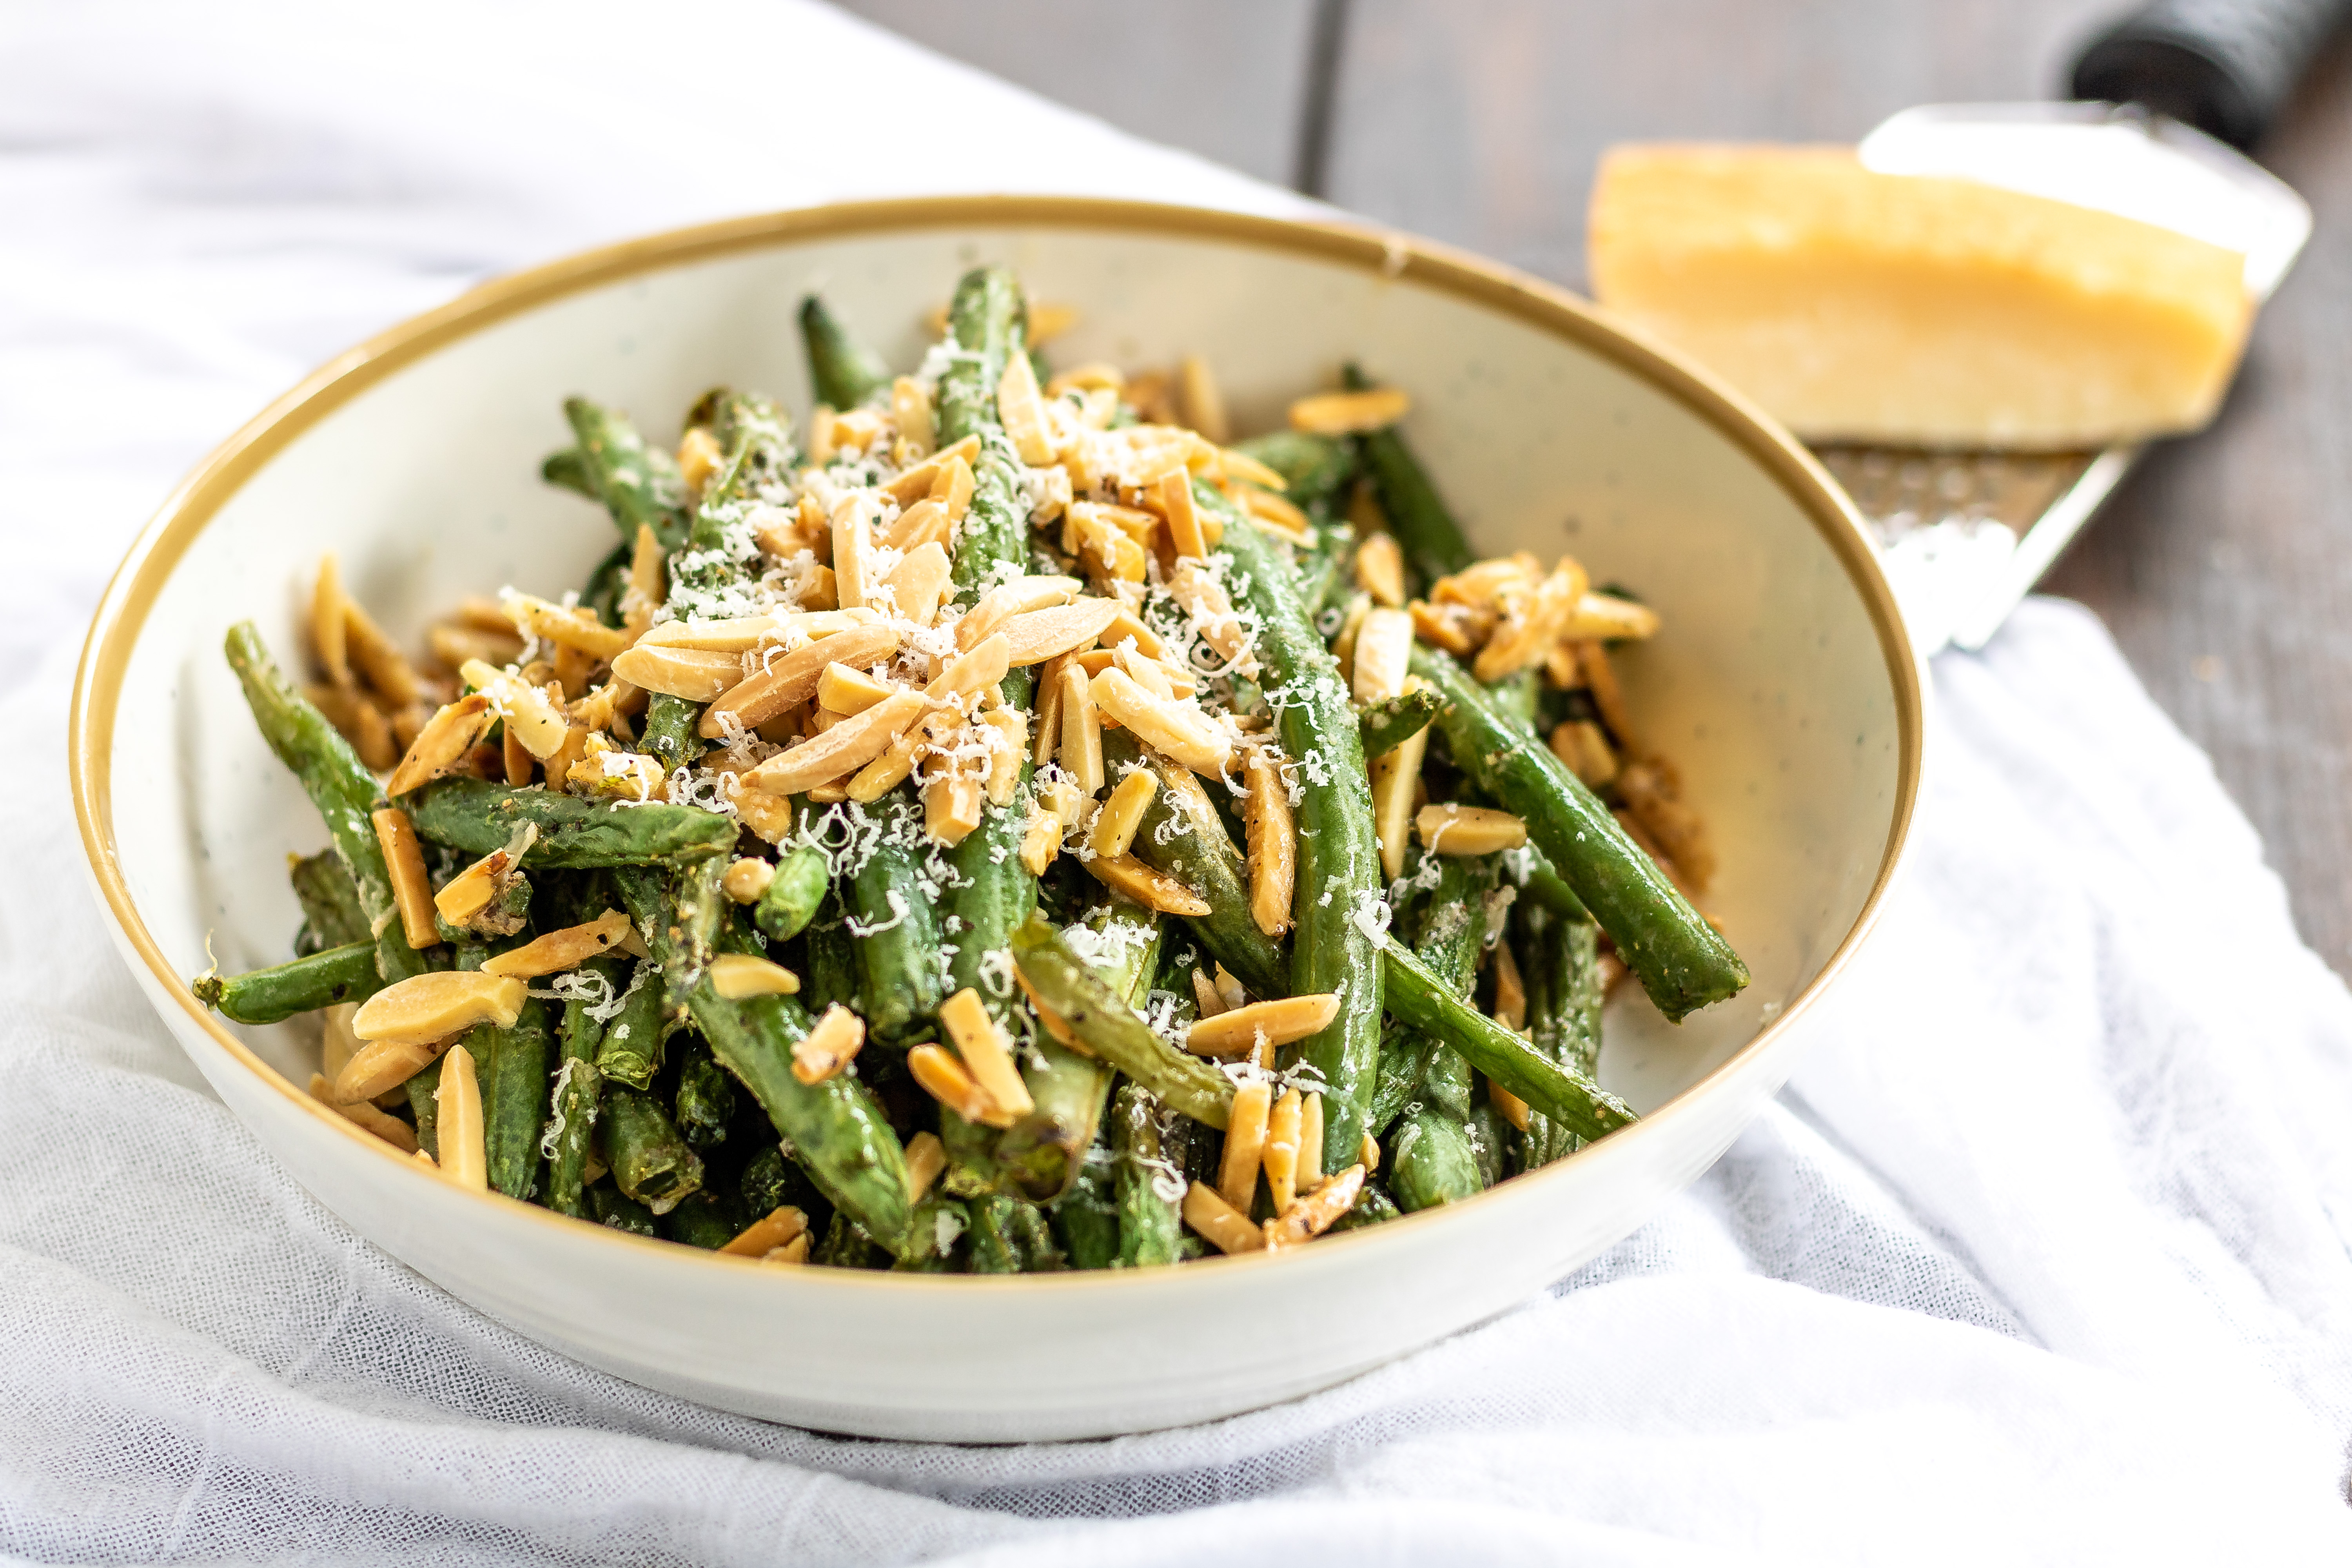 green beans in a bowl with almonds and parmesan cheese